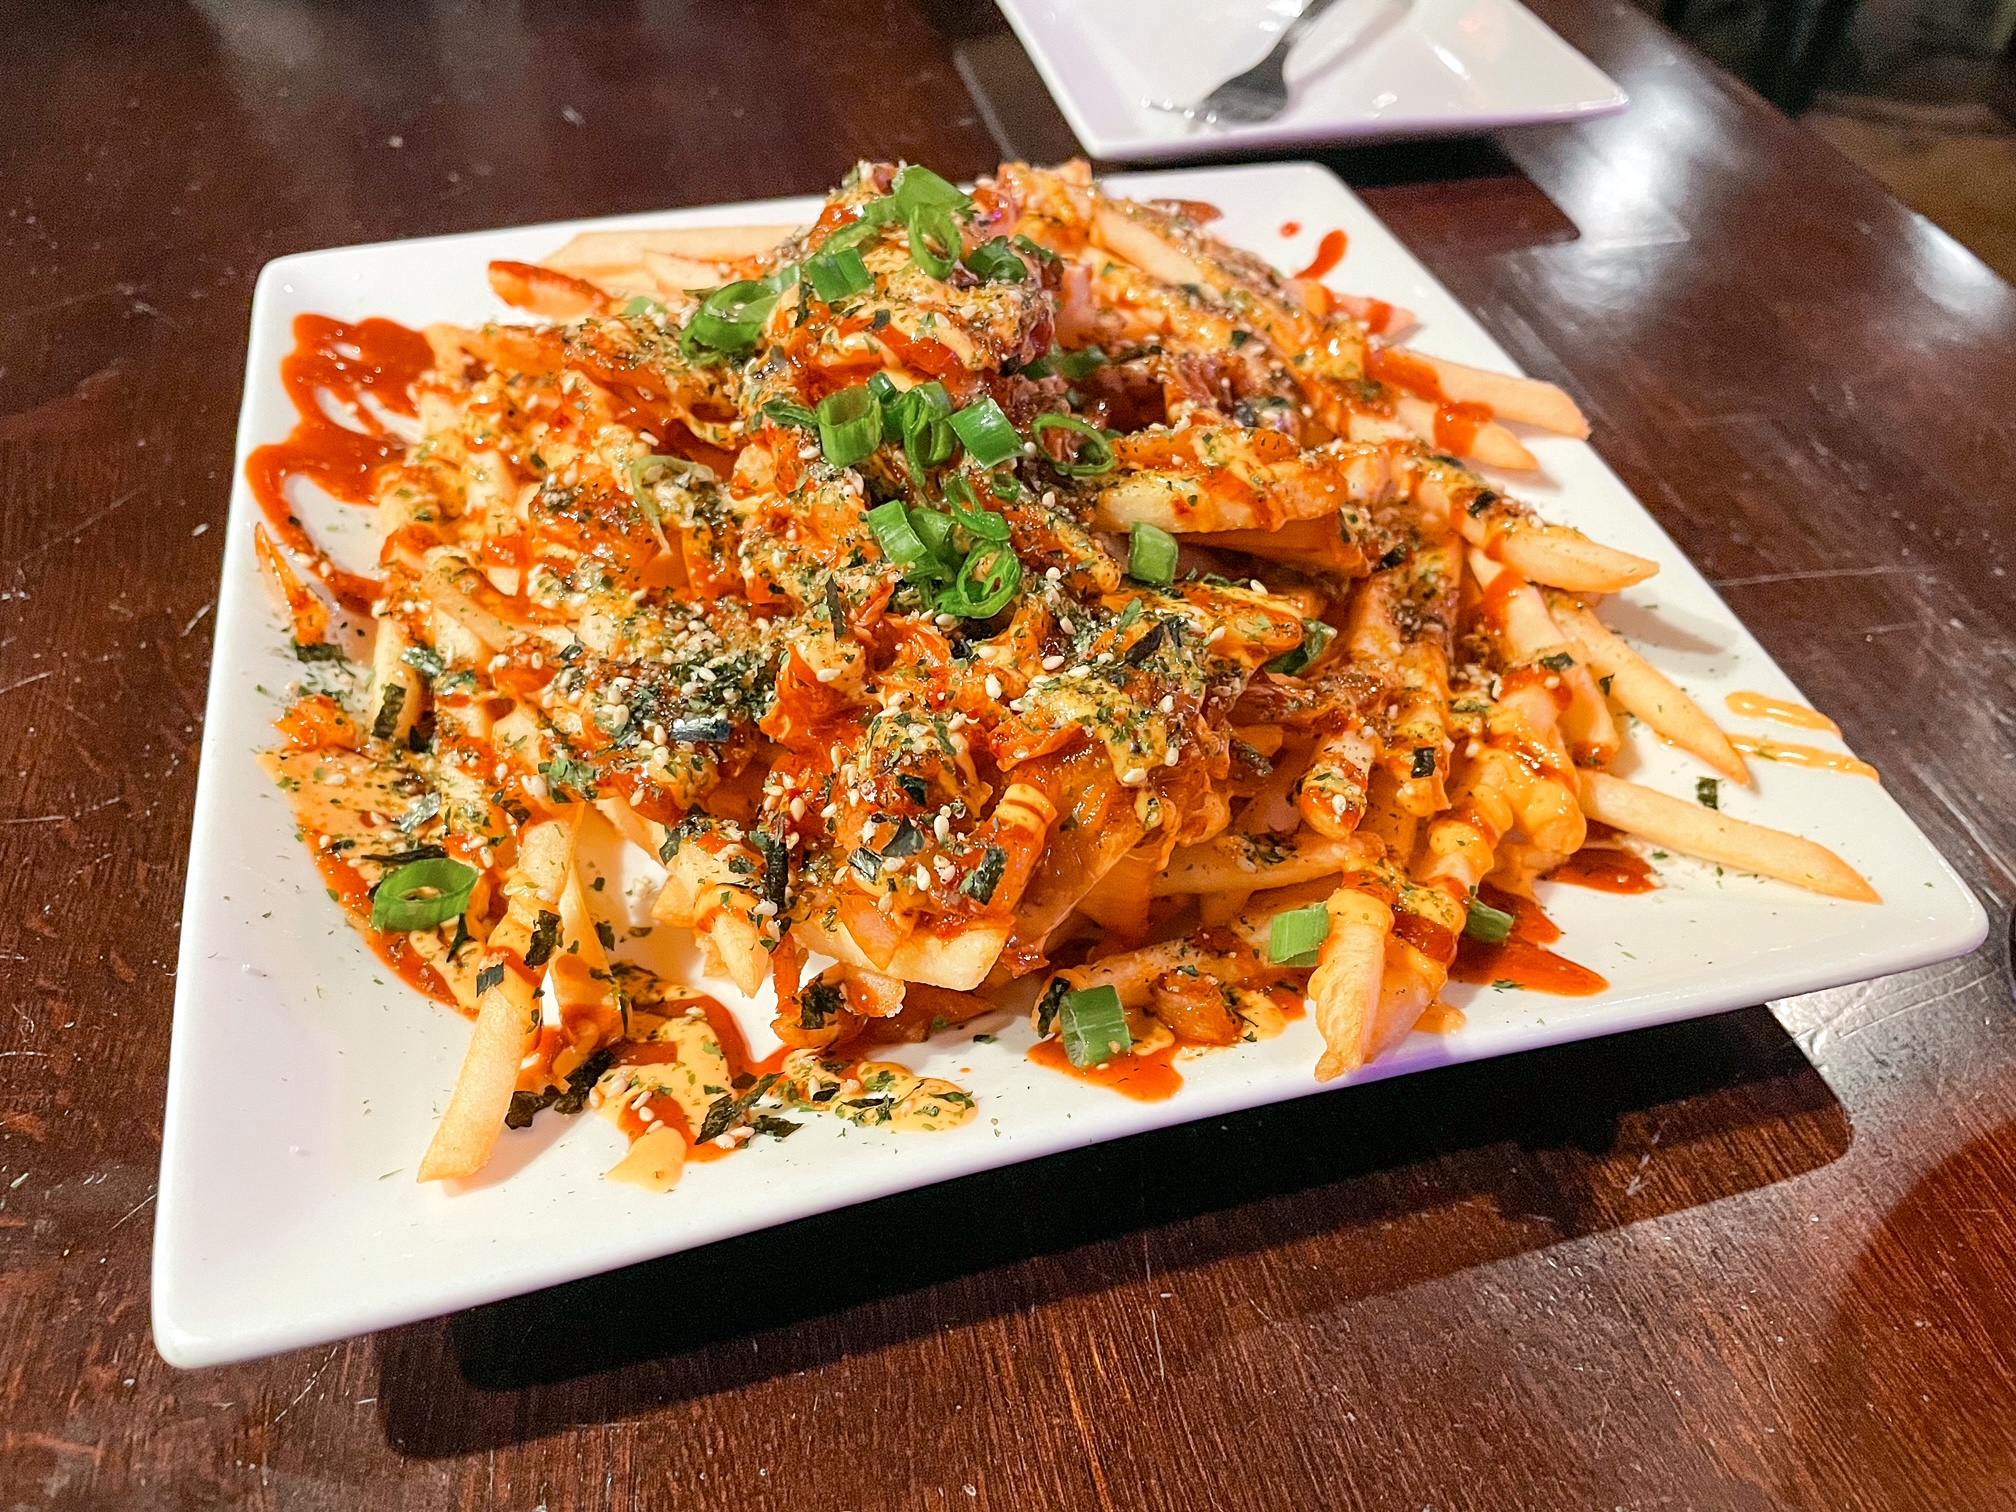 The famous Kimchi Fries of Little Leaf Tea & Bar in Fresno